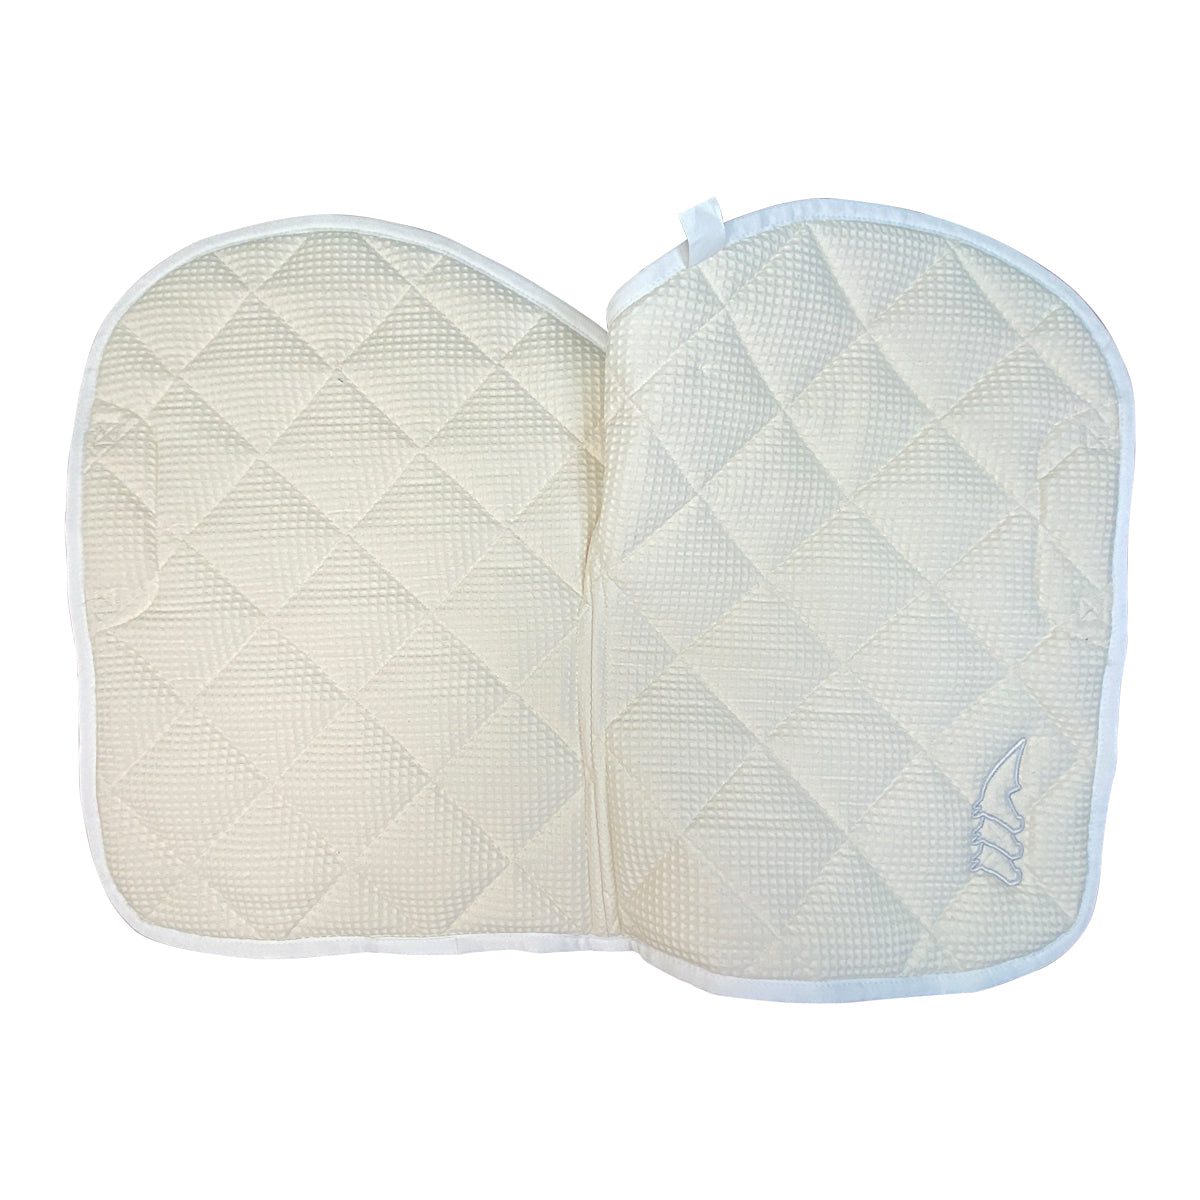 Equiline EGRIT RN 'Rombo' Saddle Pad in White W/ Honeycomb Inserts